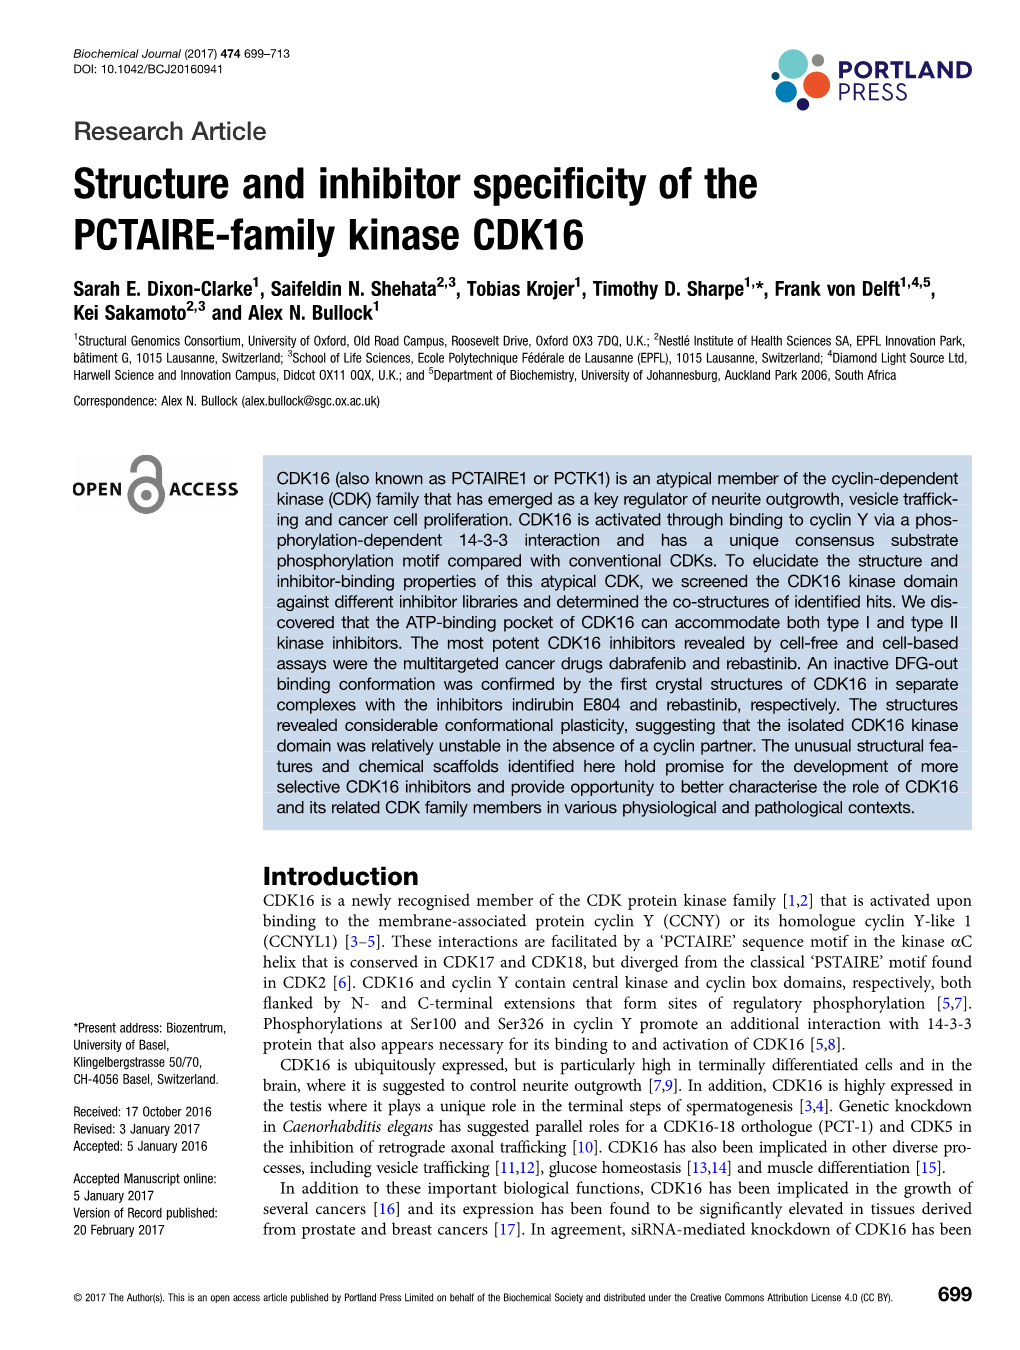 Structure and Inhibitor Specificity of the PCTAIRE-Family Kinase CDK16